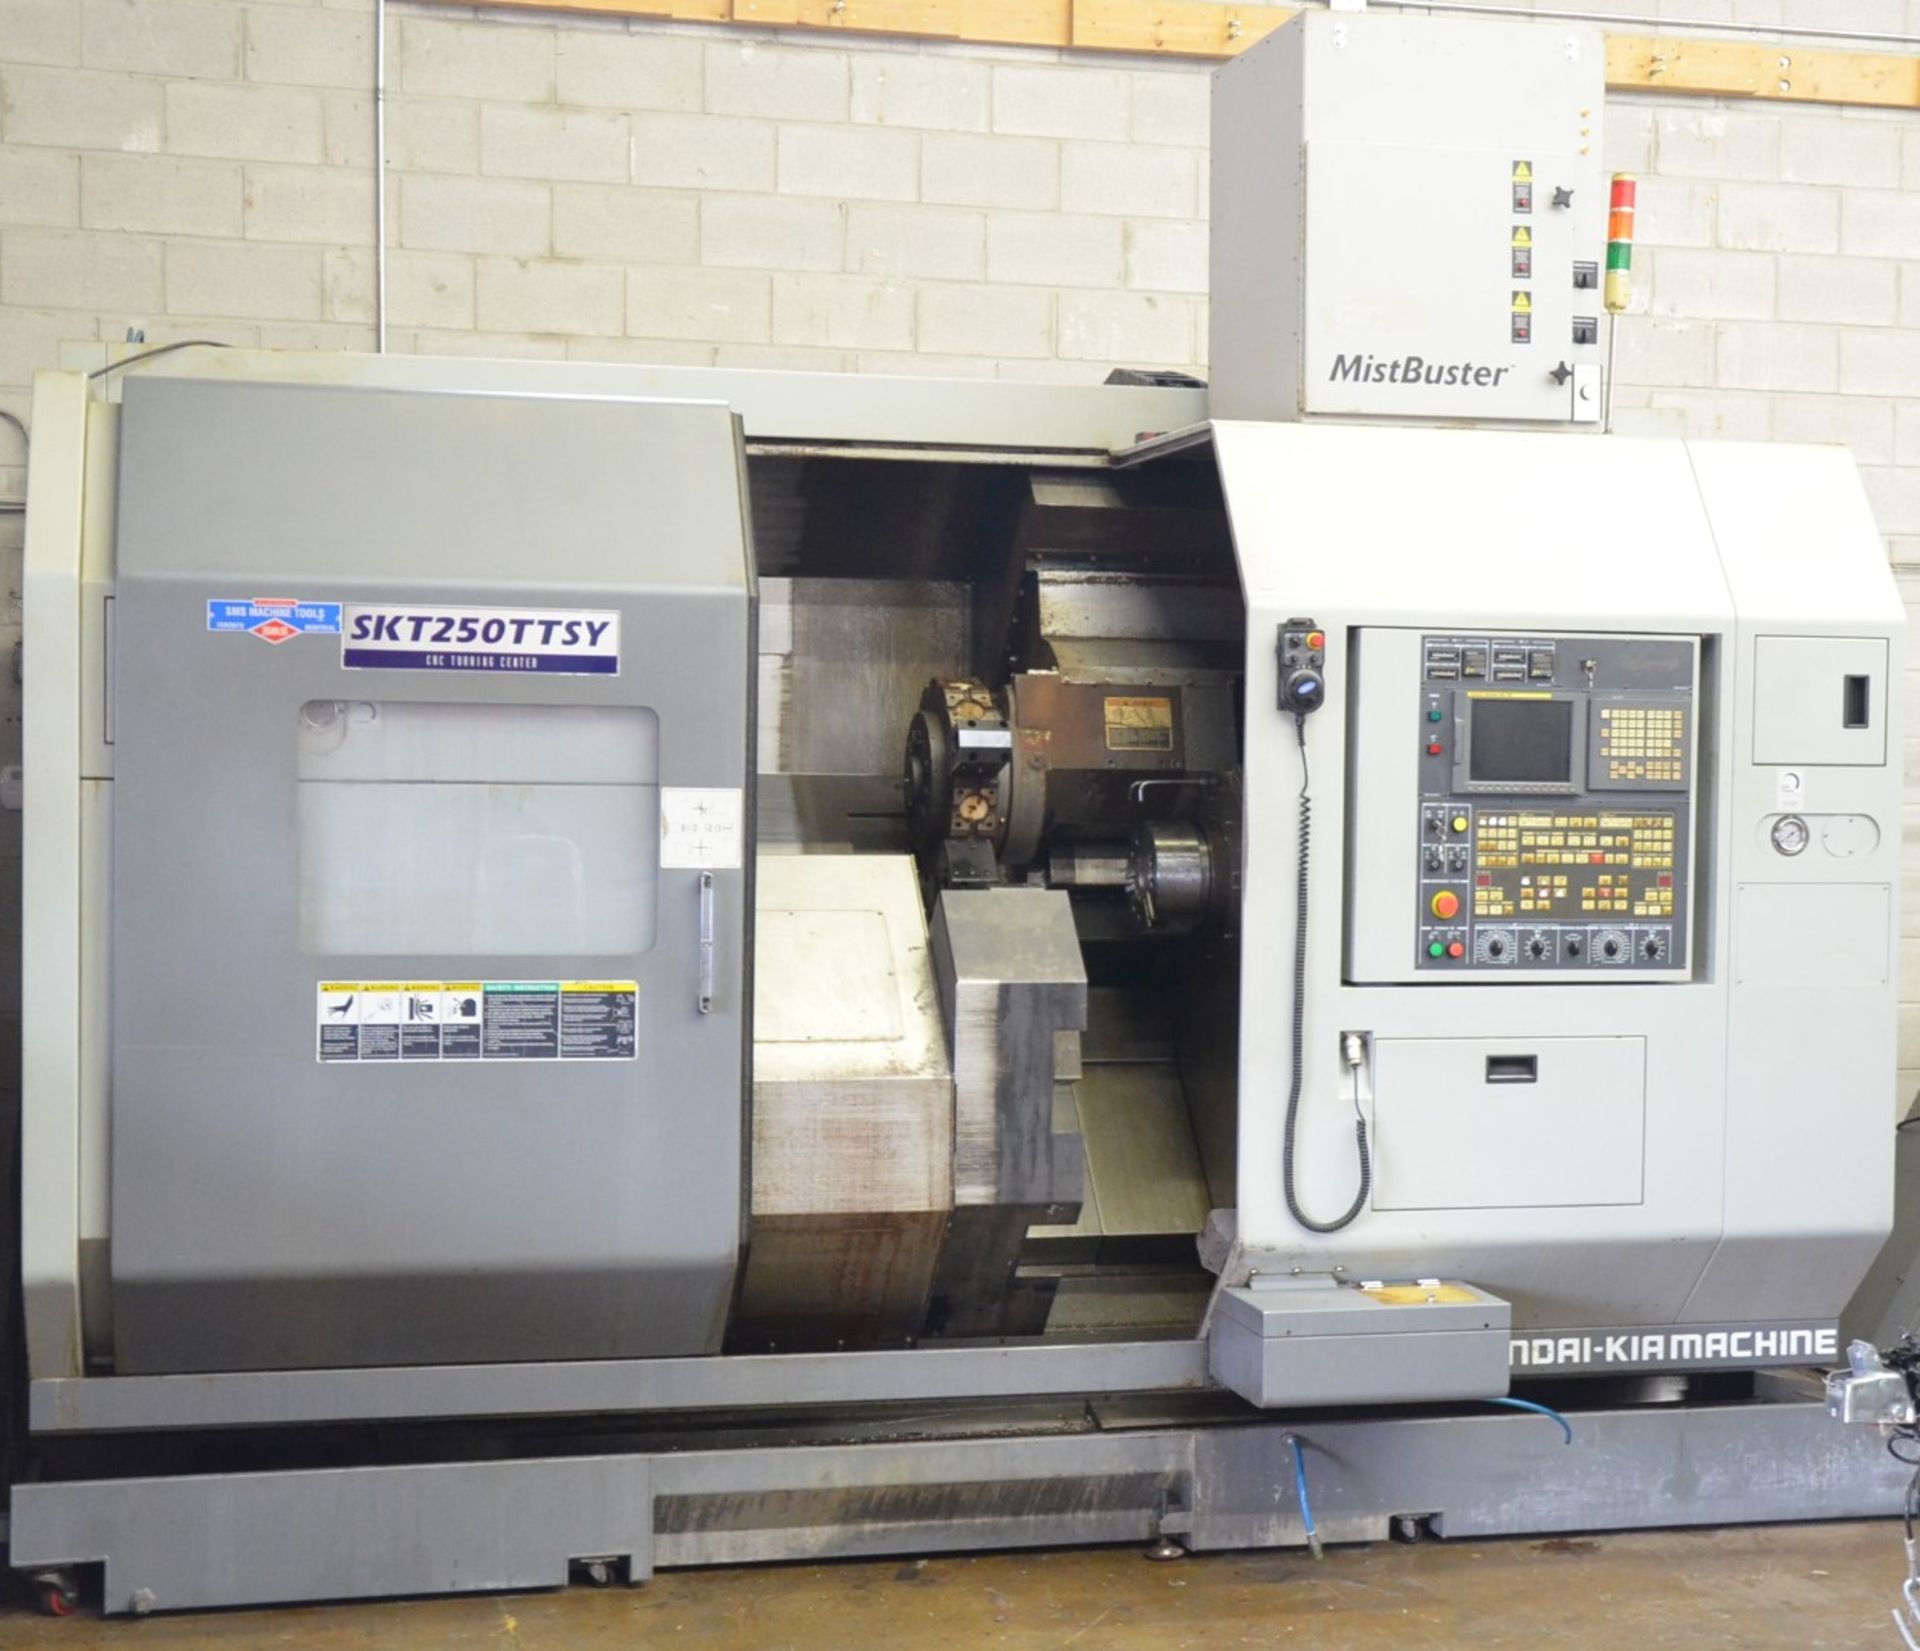 HYUNDAI KIA (2009) SKT250TTSY CNC MULTI-AXIS, OPPOSED SPINDLE TWIN TURRET TURNING CENTER